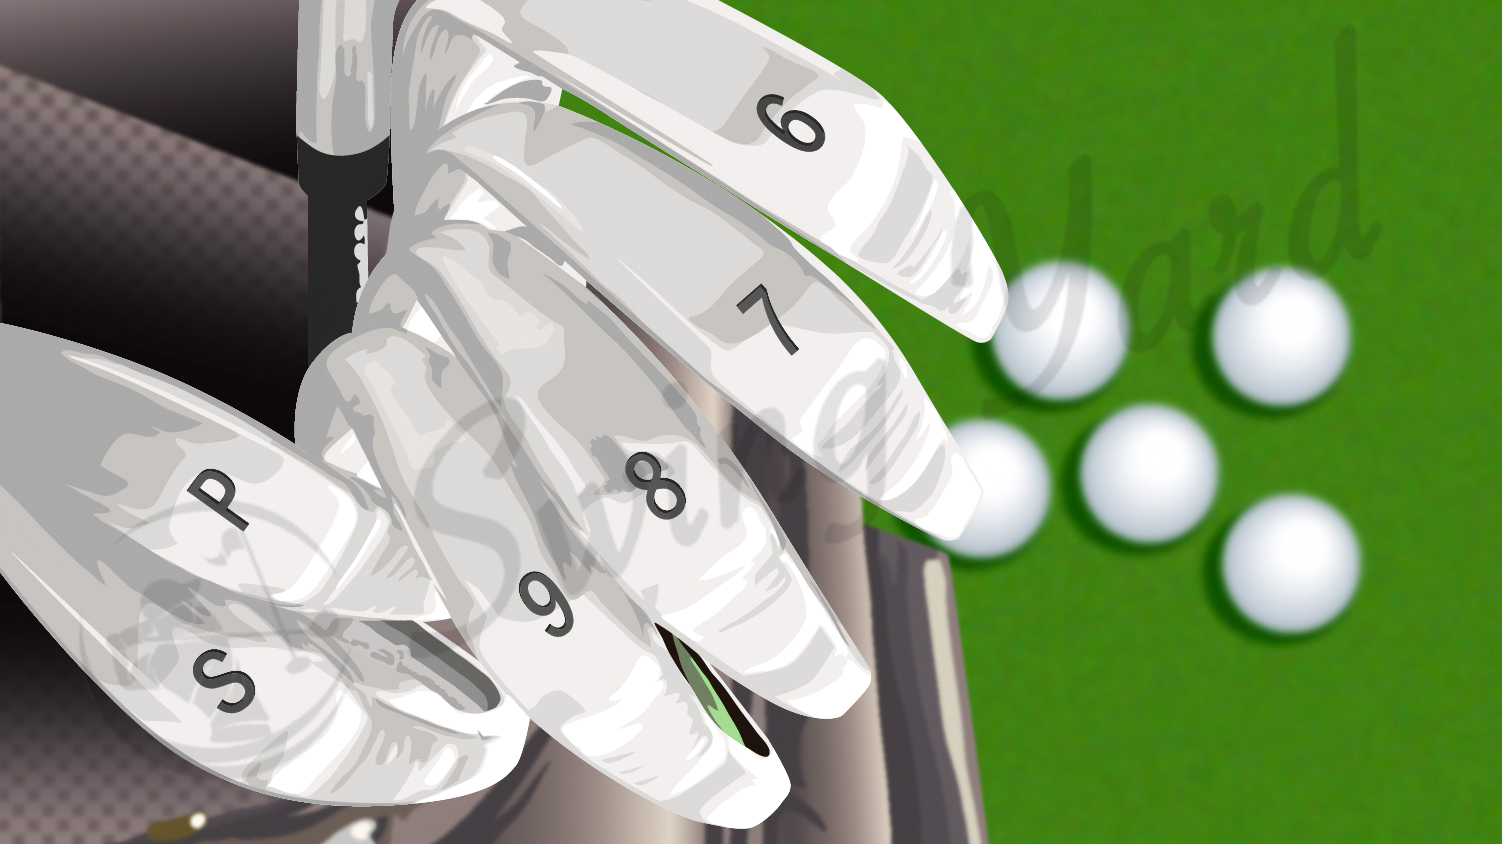 numbered club heads in bag with golf balls in the background